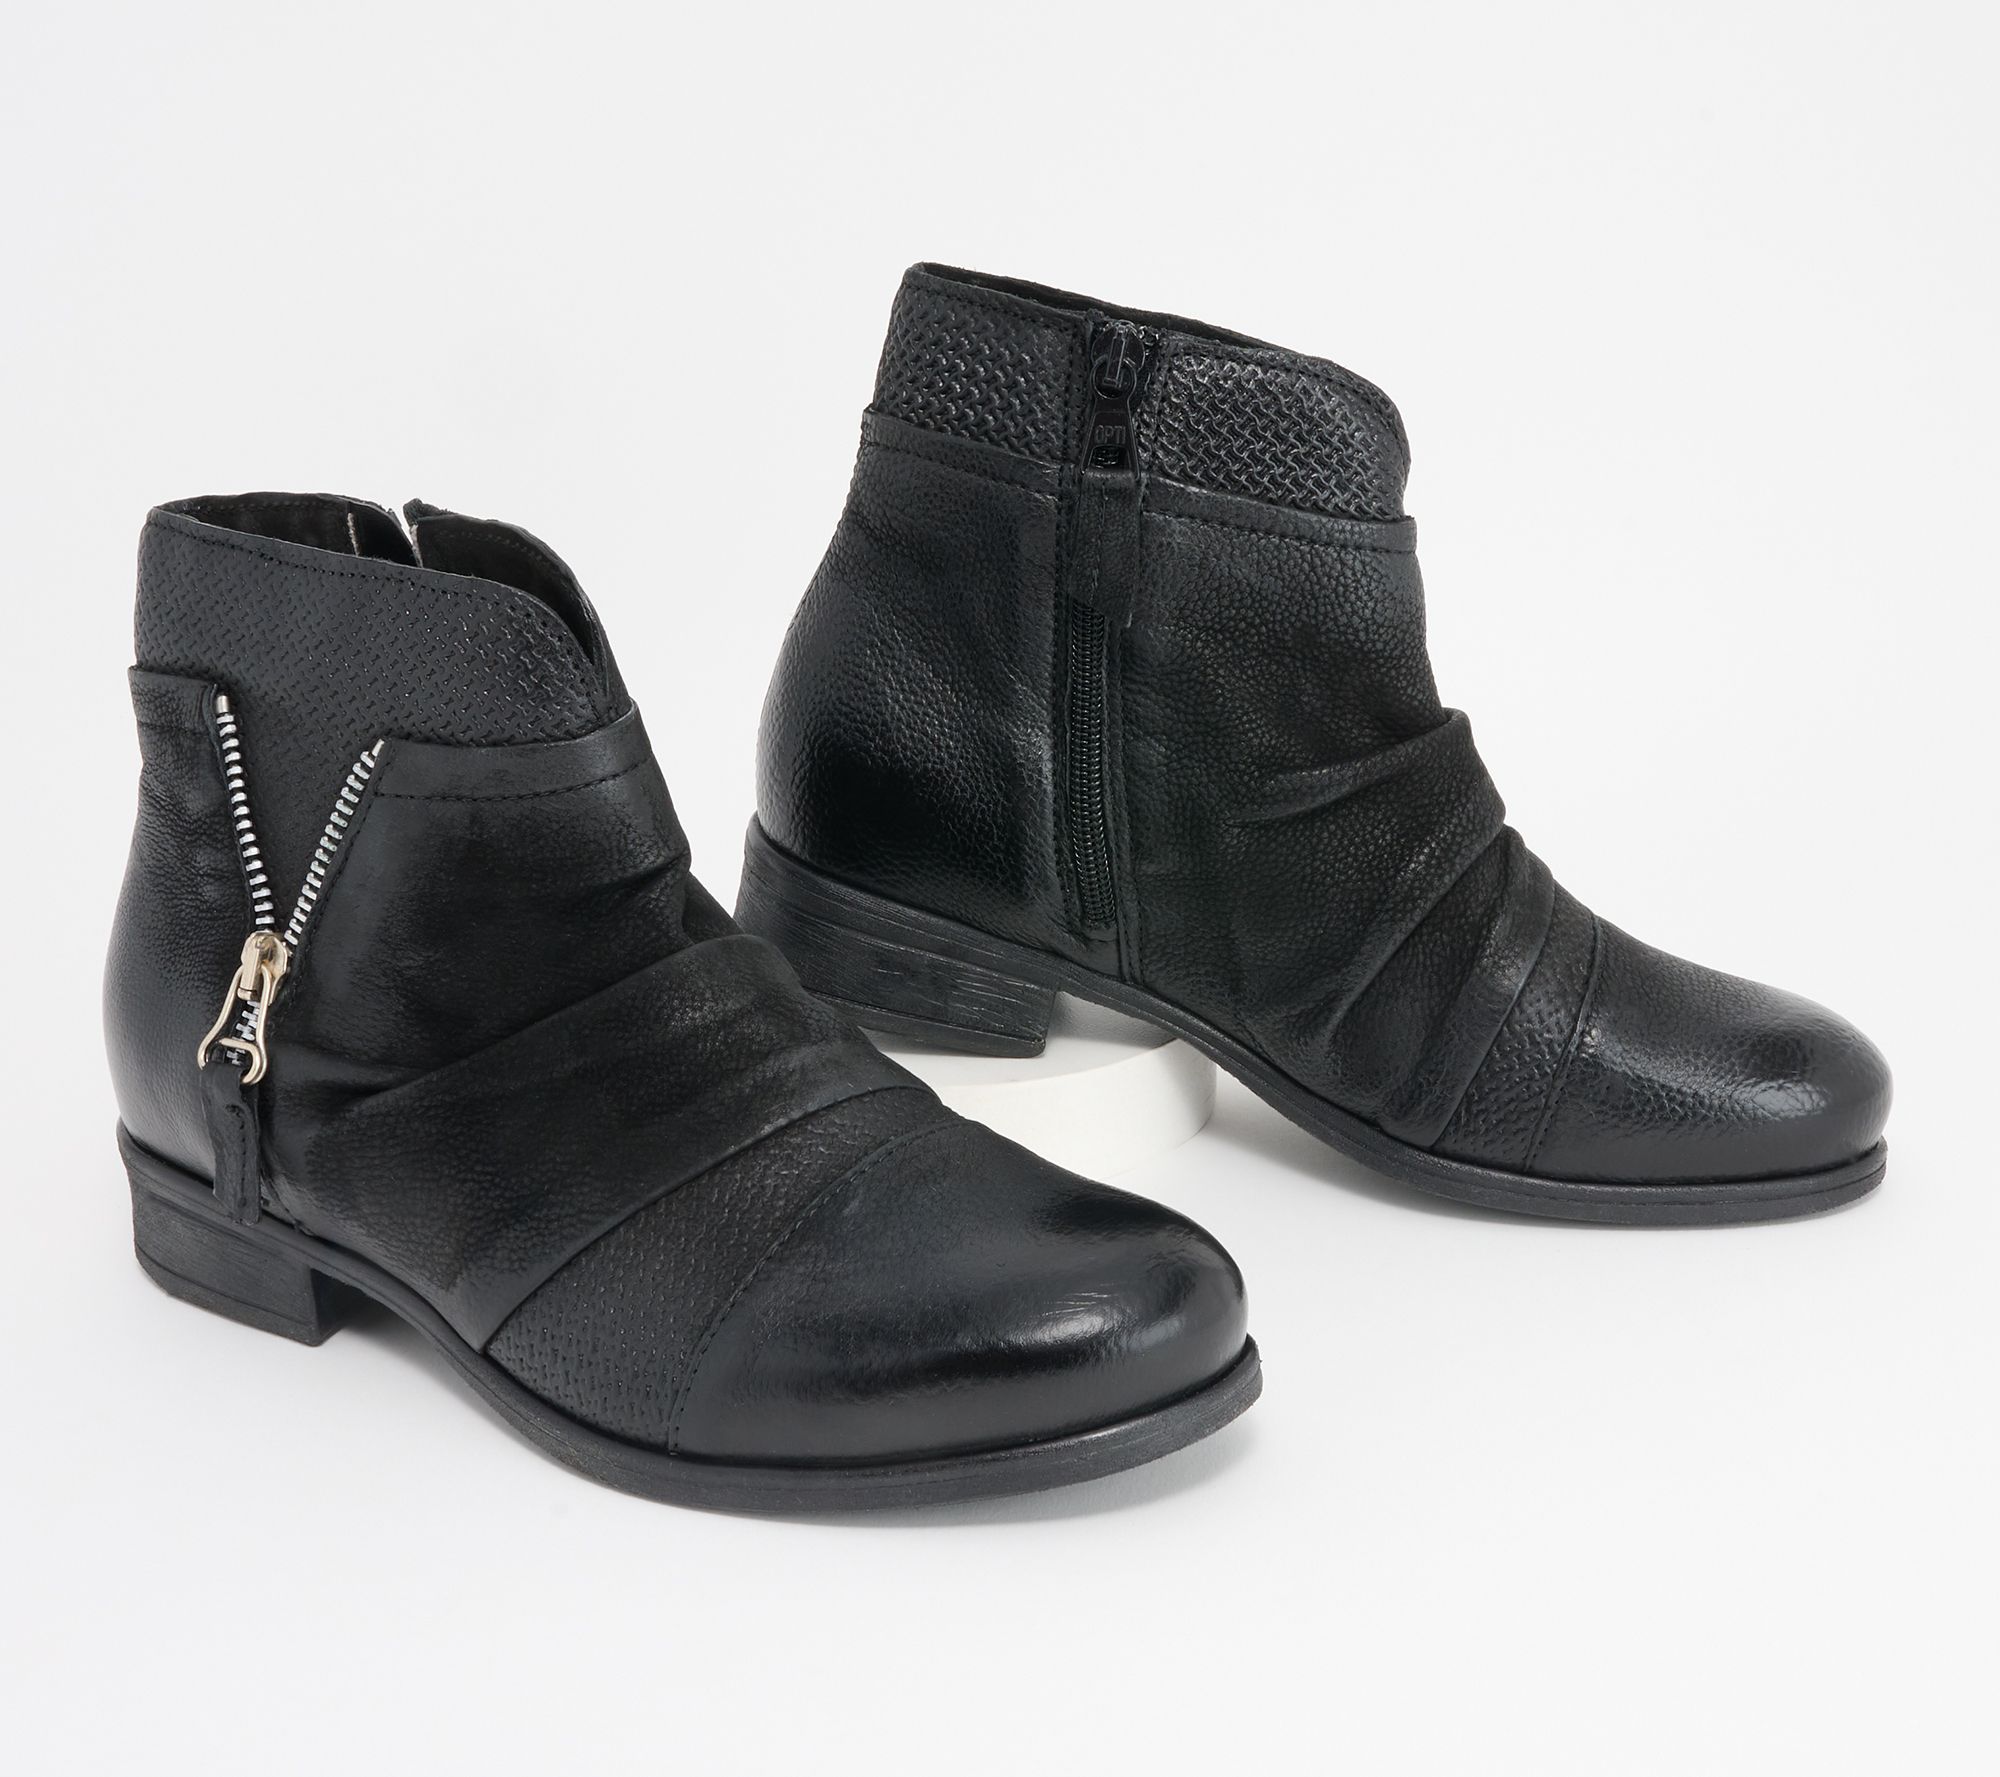  Miz Mooz Louise Ankle Boots for Women - Ladies Handcrafted  Leather Booties - Short & Low Cut w/Zipper & 1 Heel (Black - 6)